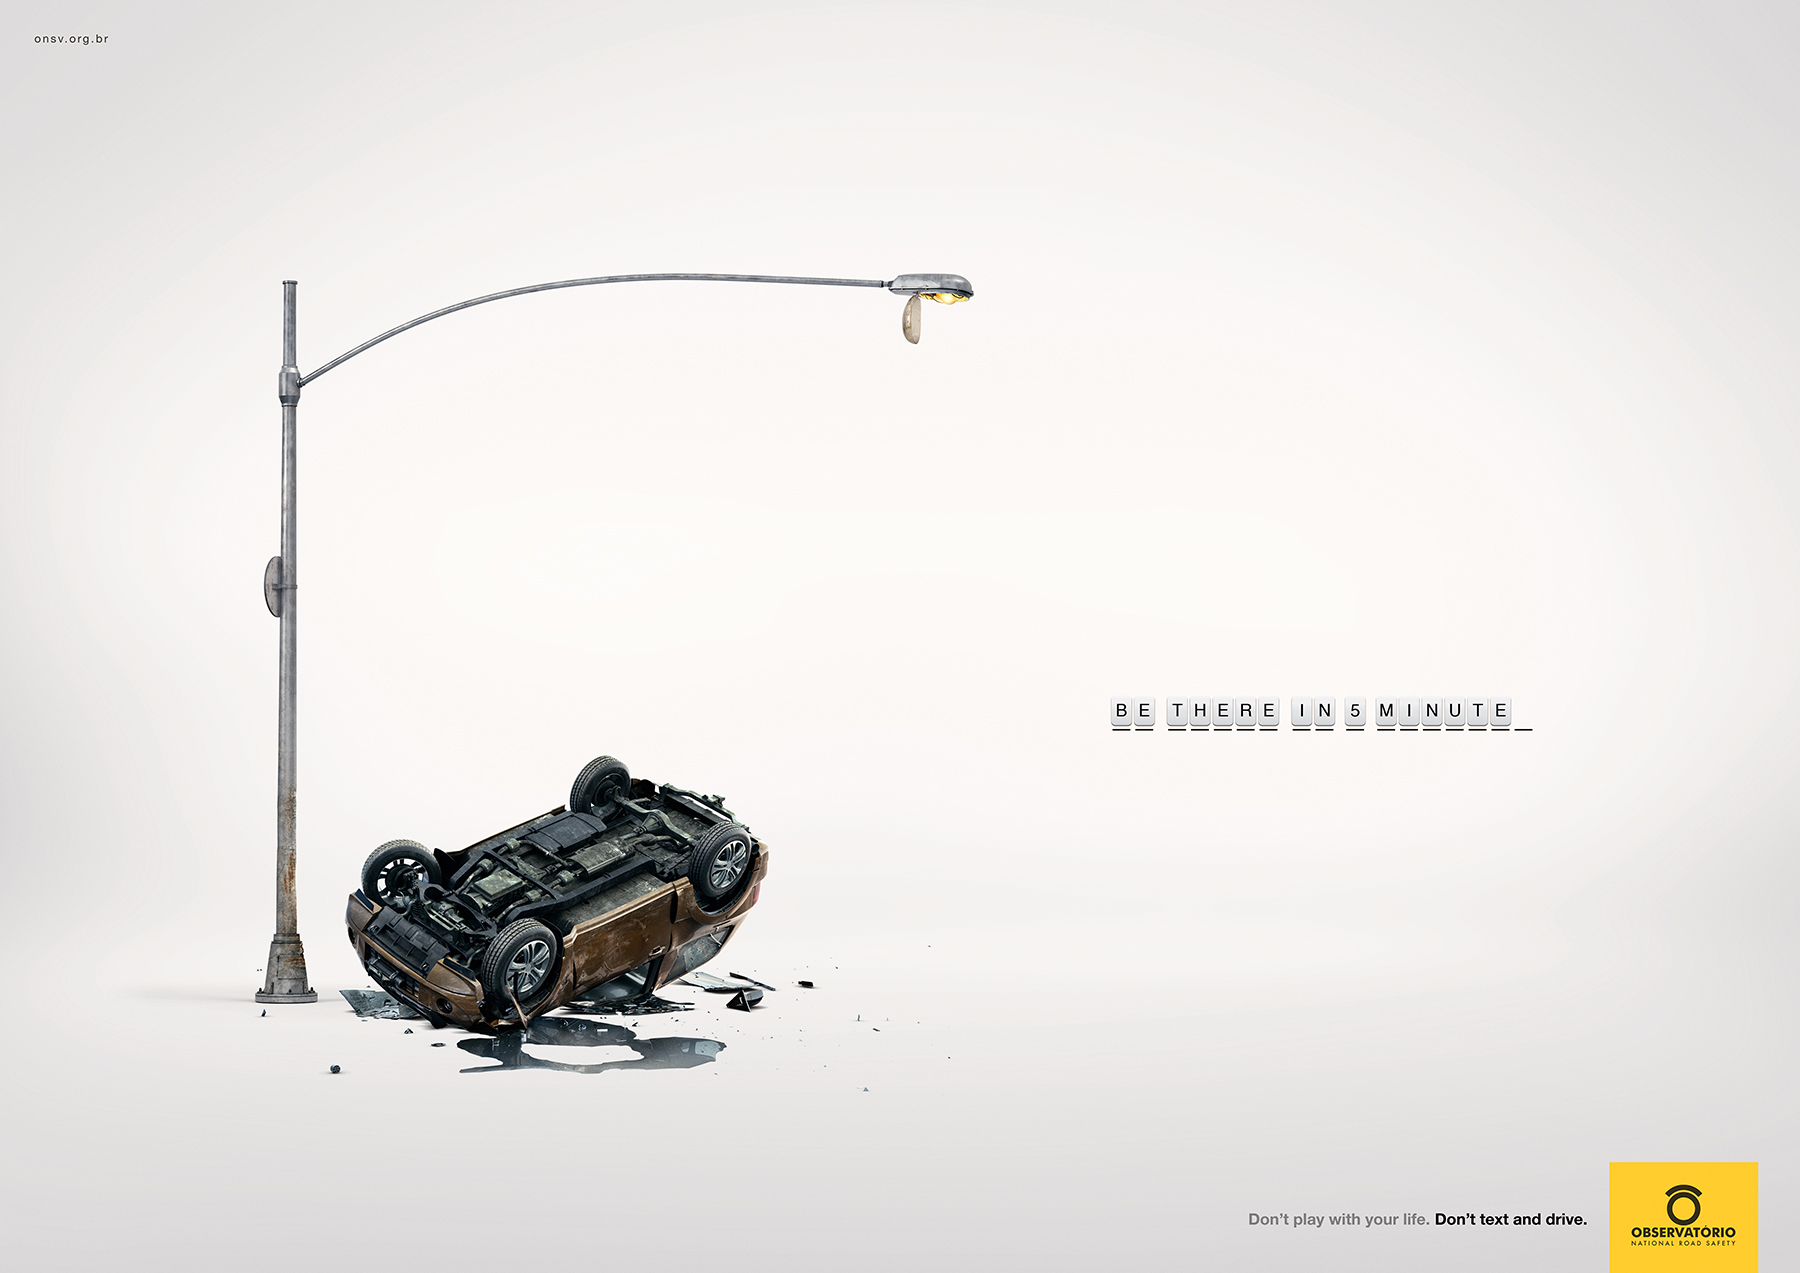 observatorio-national-road-safety-hangman-1-cotw